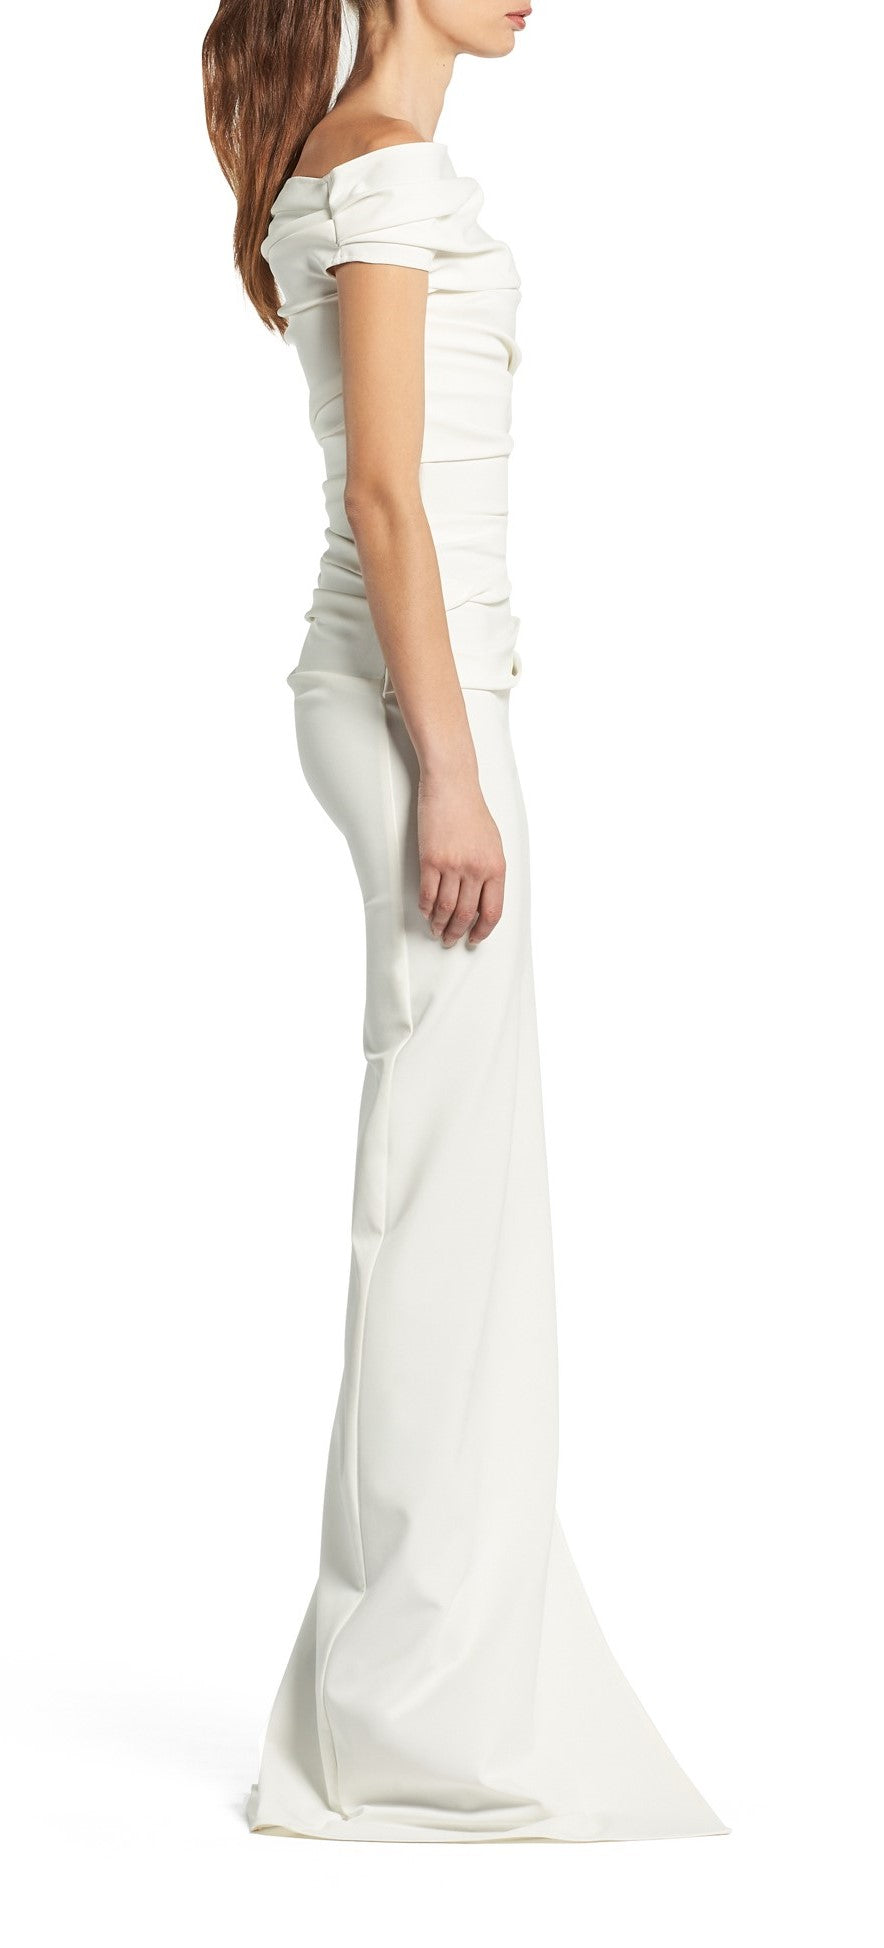 Toni Maticevski Assertion gown. Off the shoulder rouched fitted wedding dress.